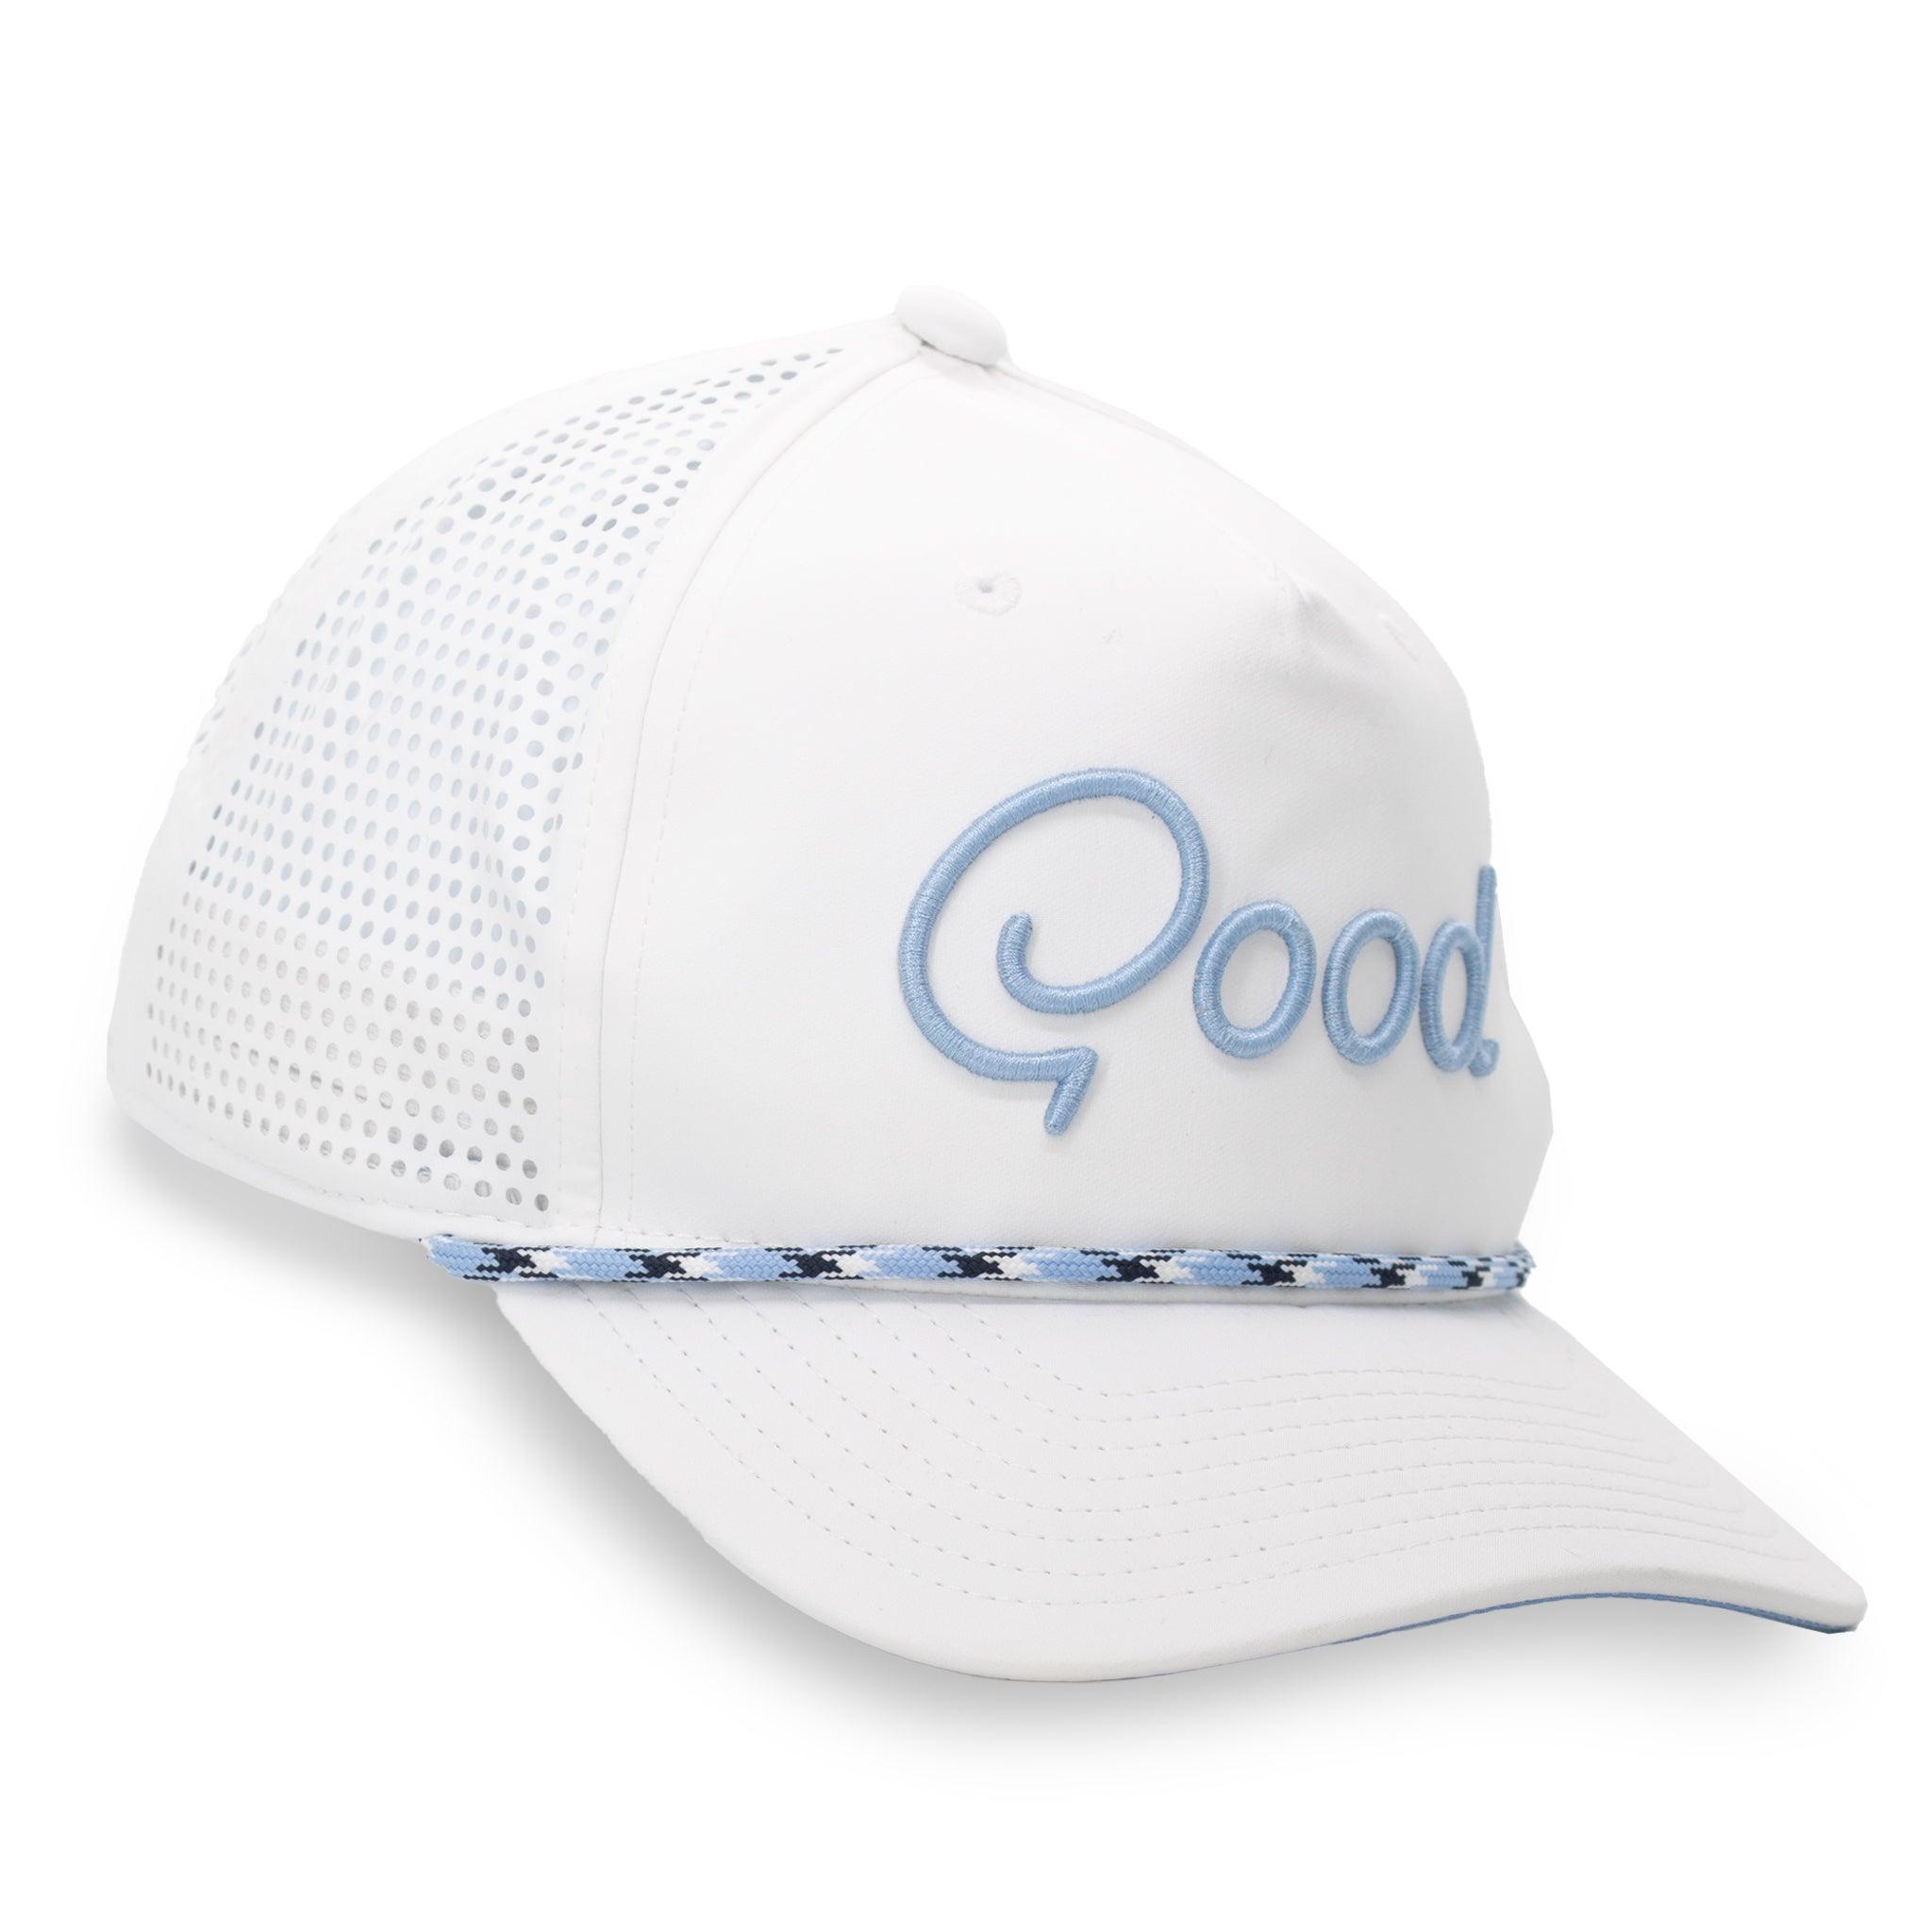 The Goodest Rope Hat - Exclusive Golf Rope Hat